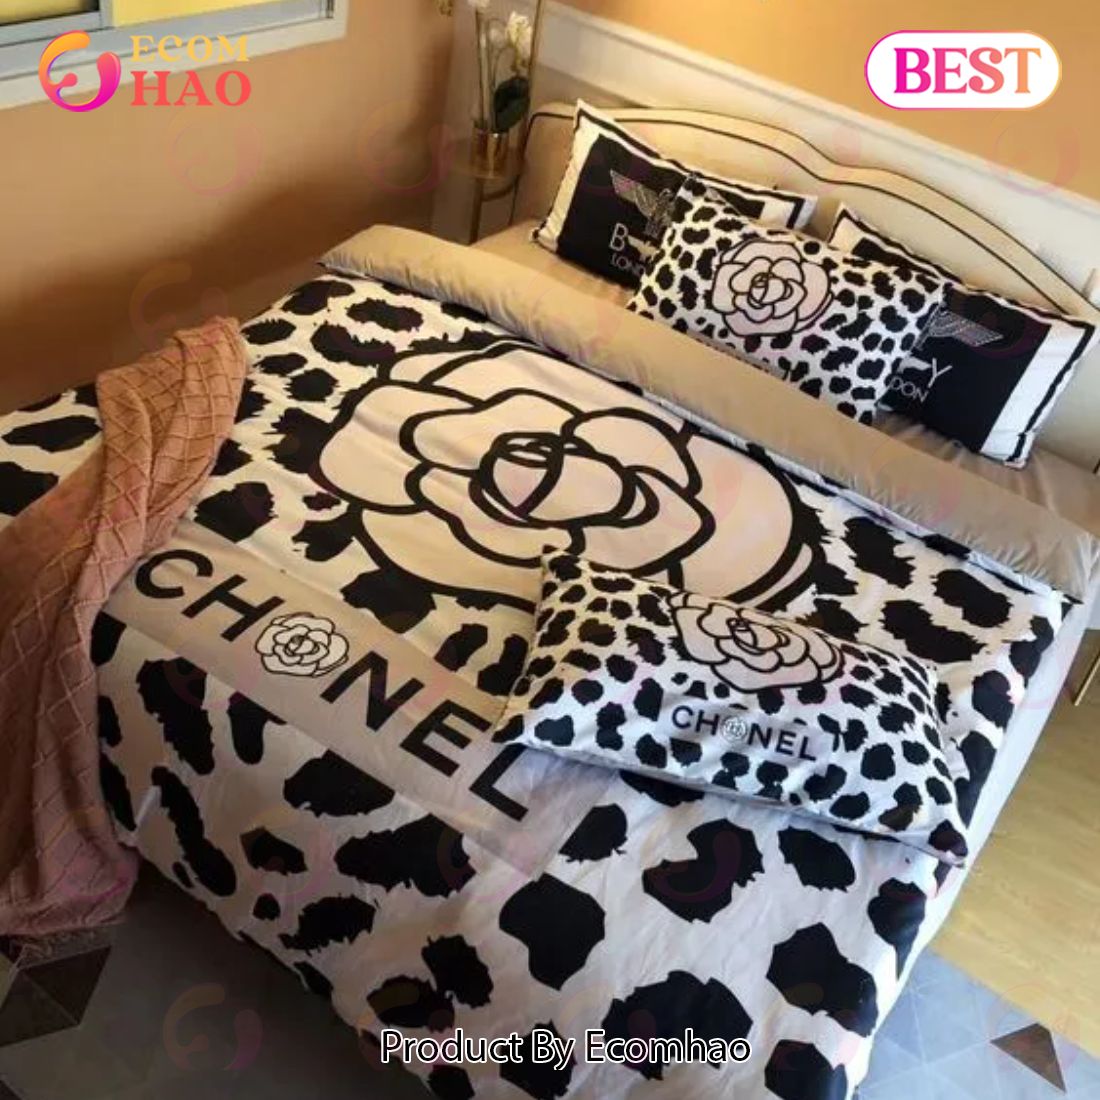 Chanel Luxury Brand High-End Bedding Set Decorations For Home Best Luxury Bed Sets Gift